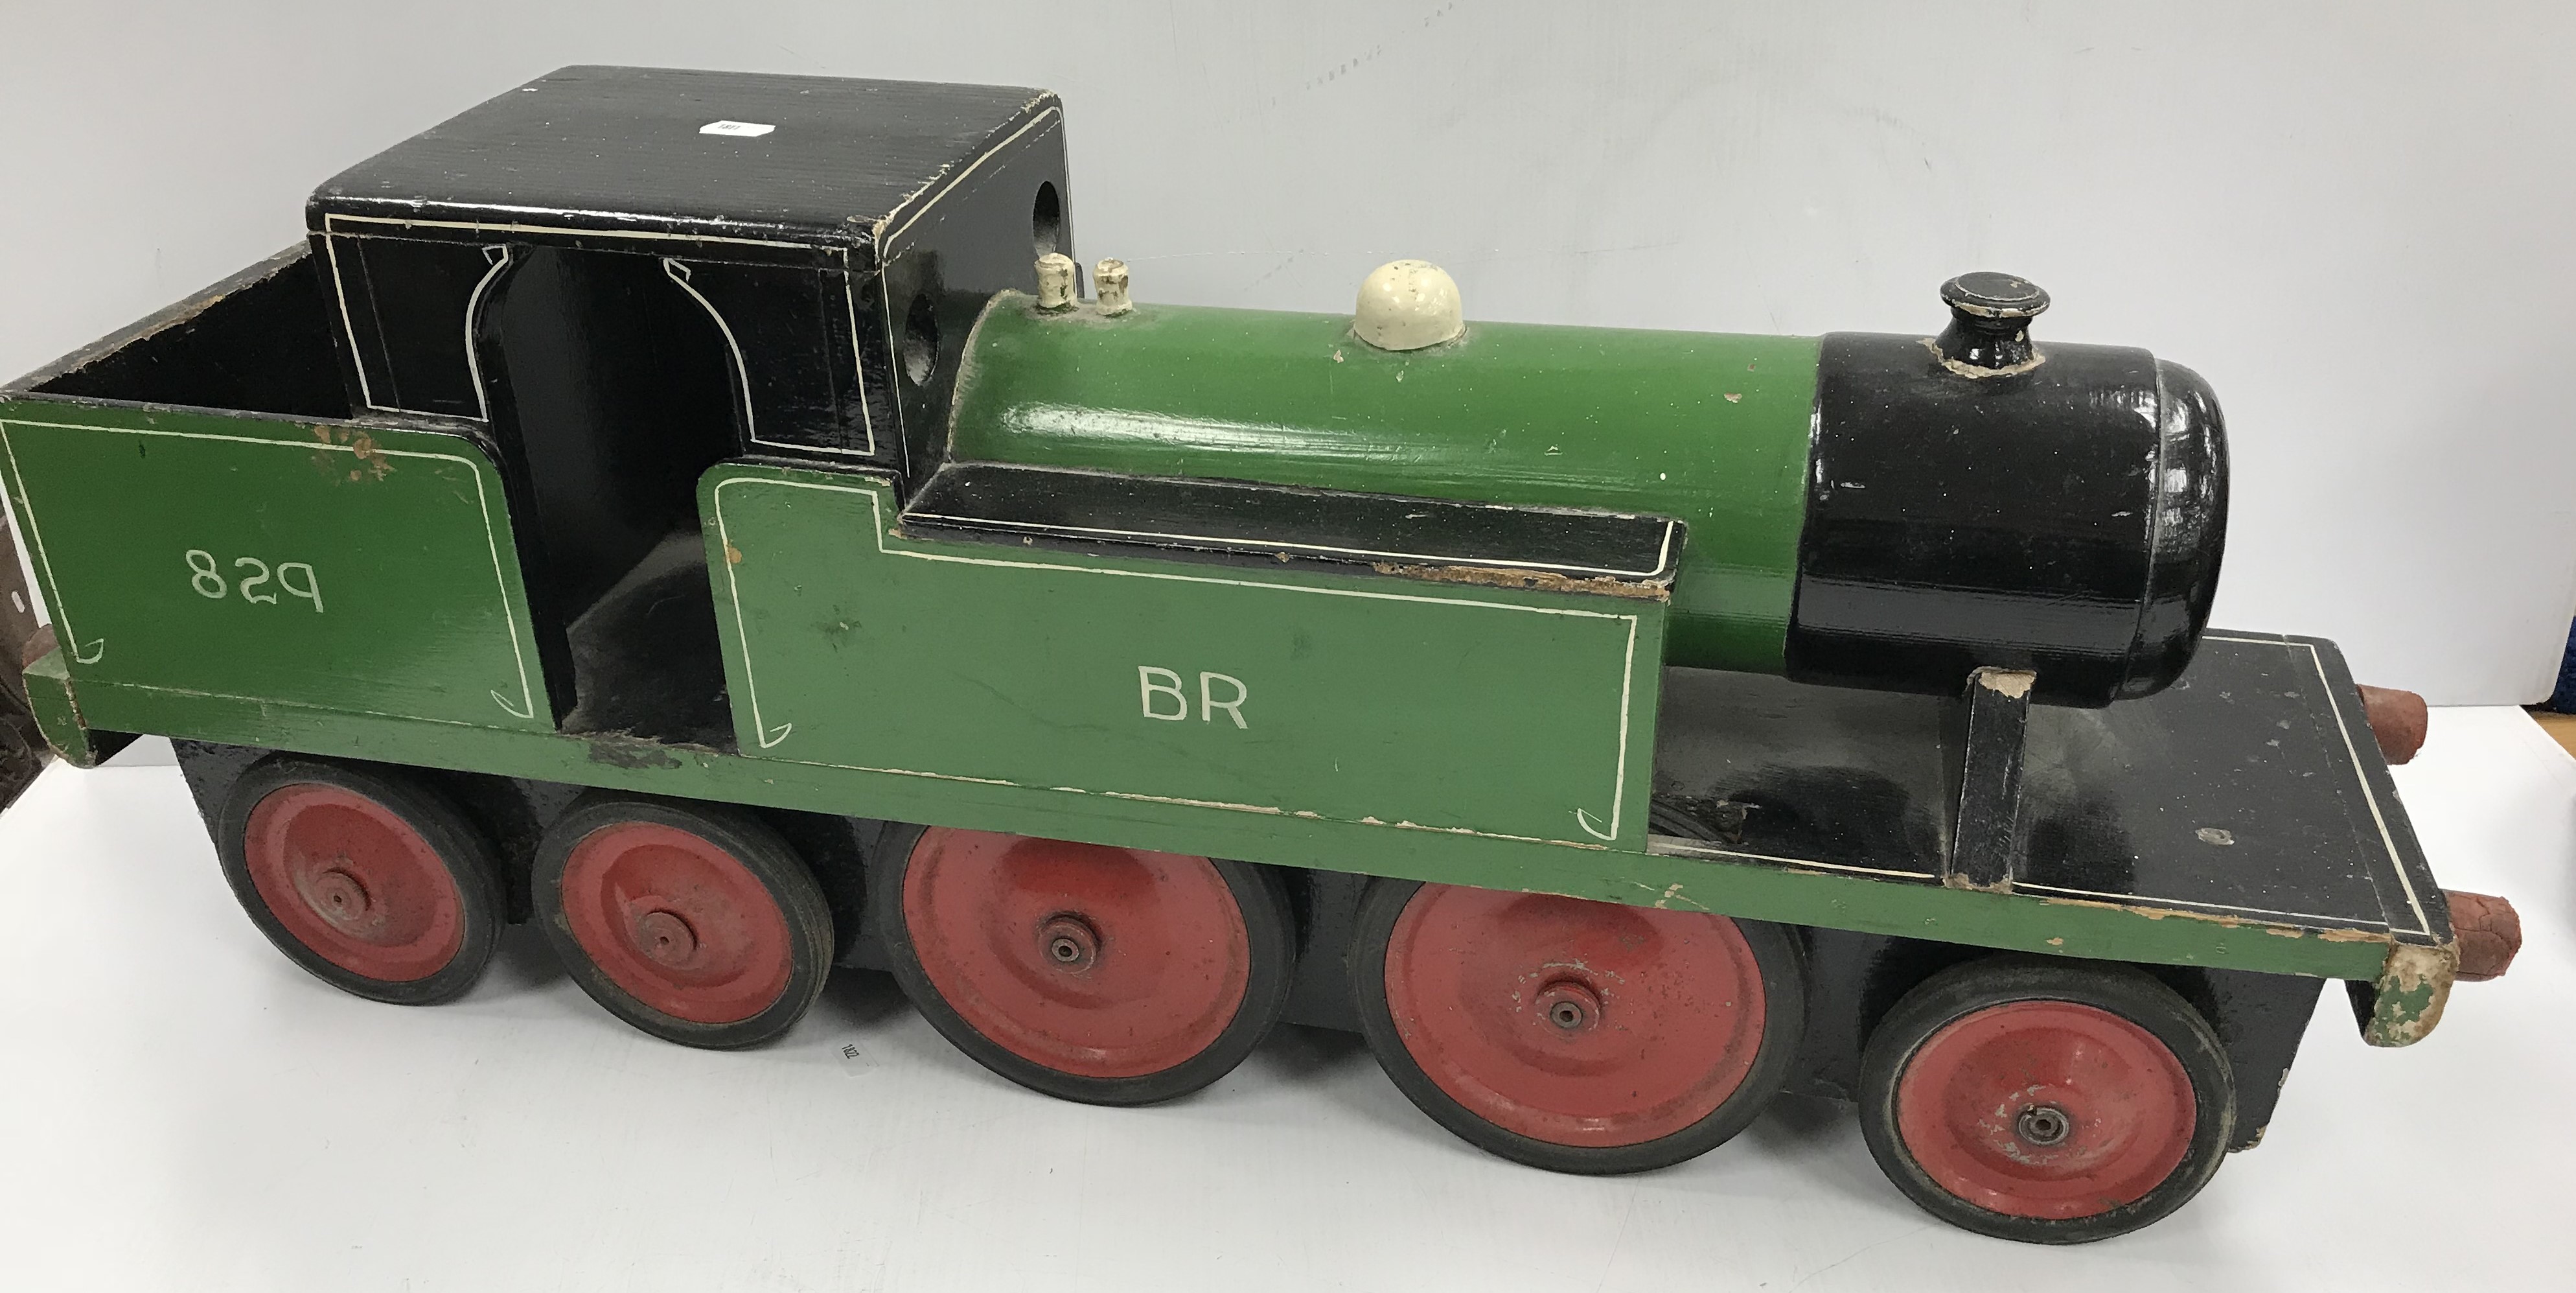 A large scratch built wooden 2-4-4 locomotive model in BR 829 green and black livery by Bob Evans - Image 2 of 2